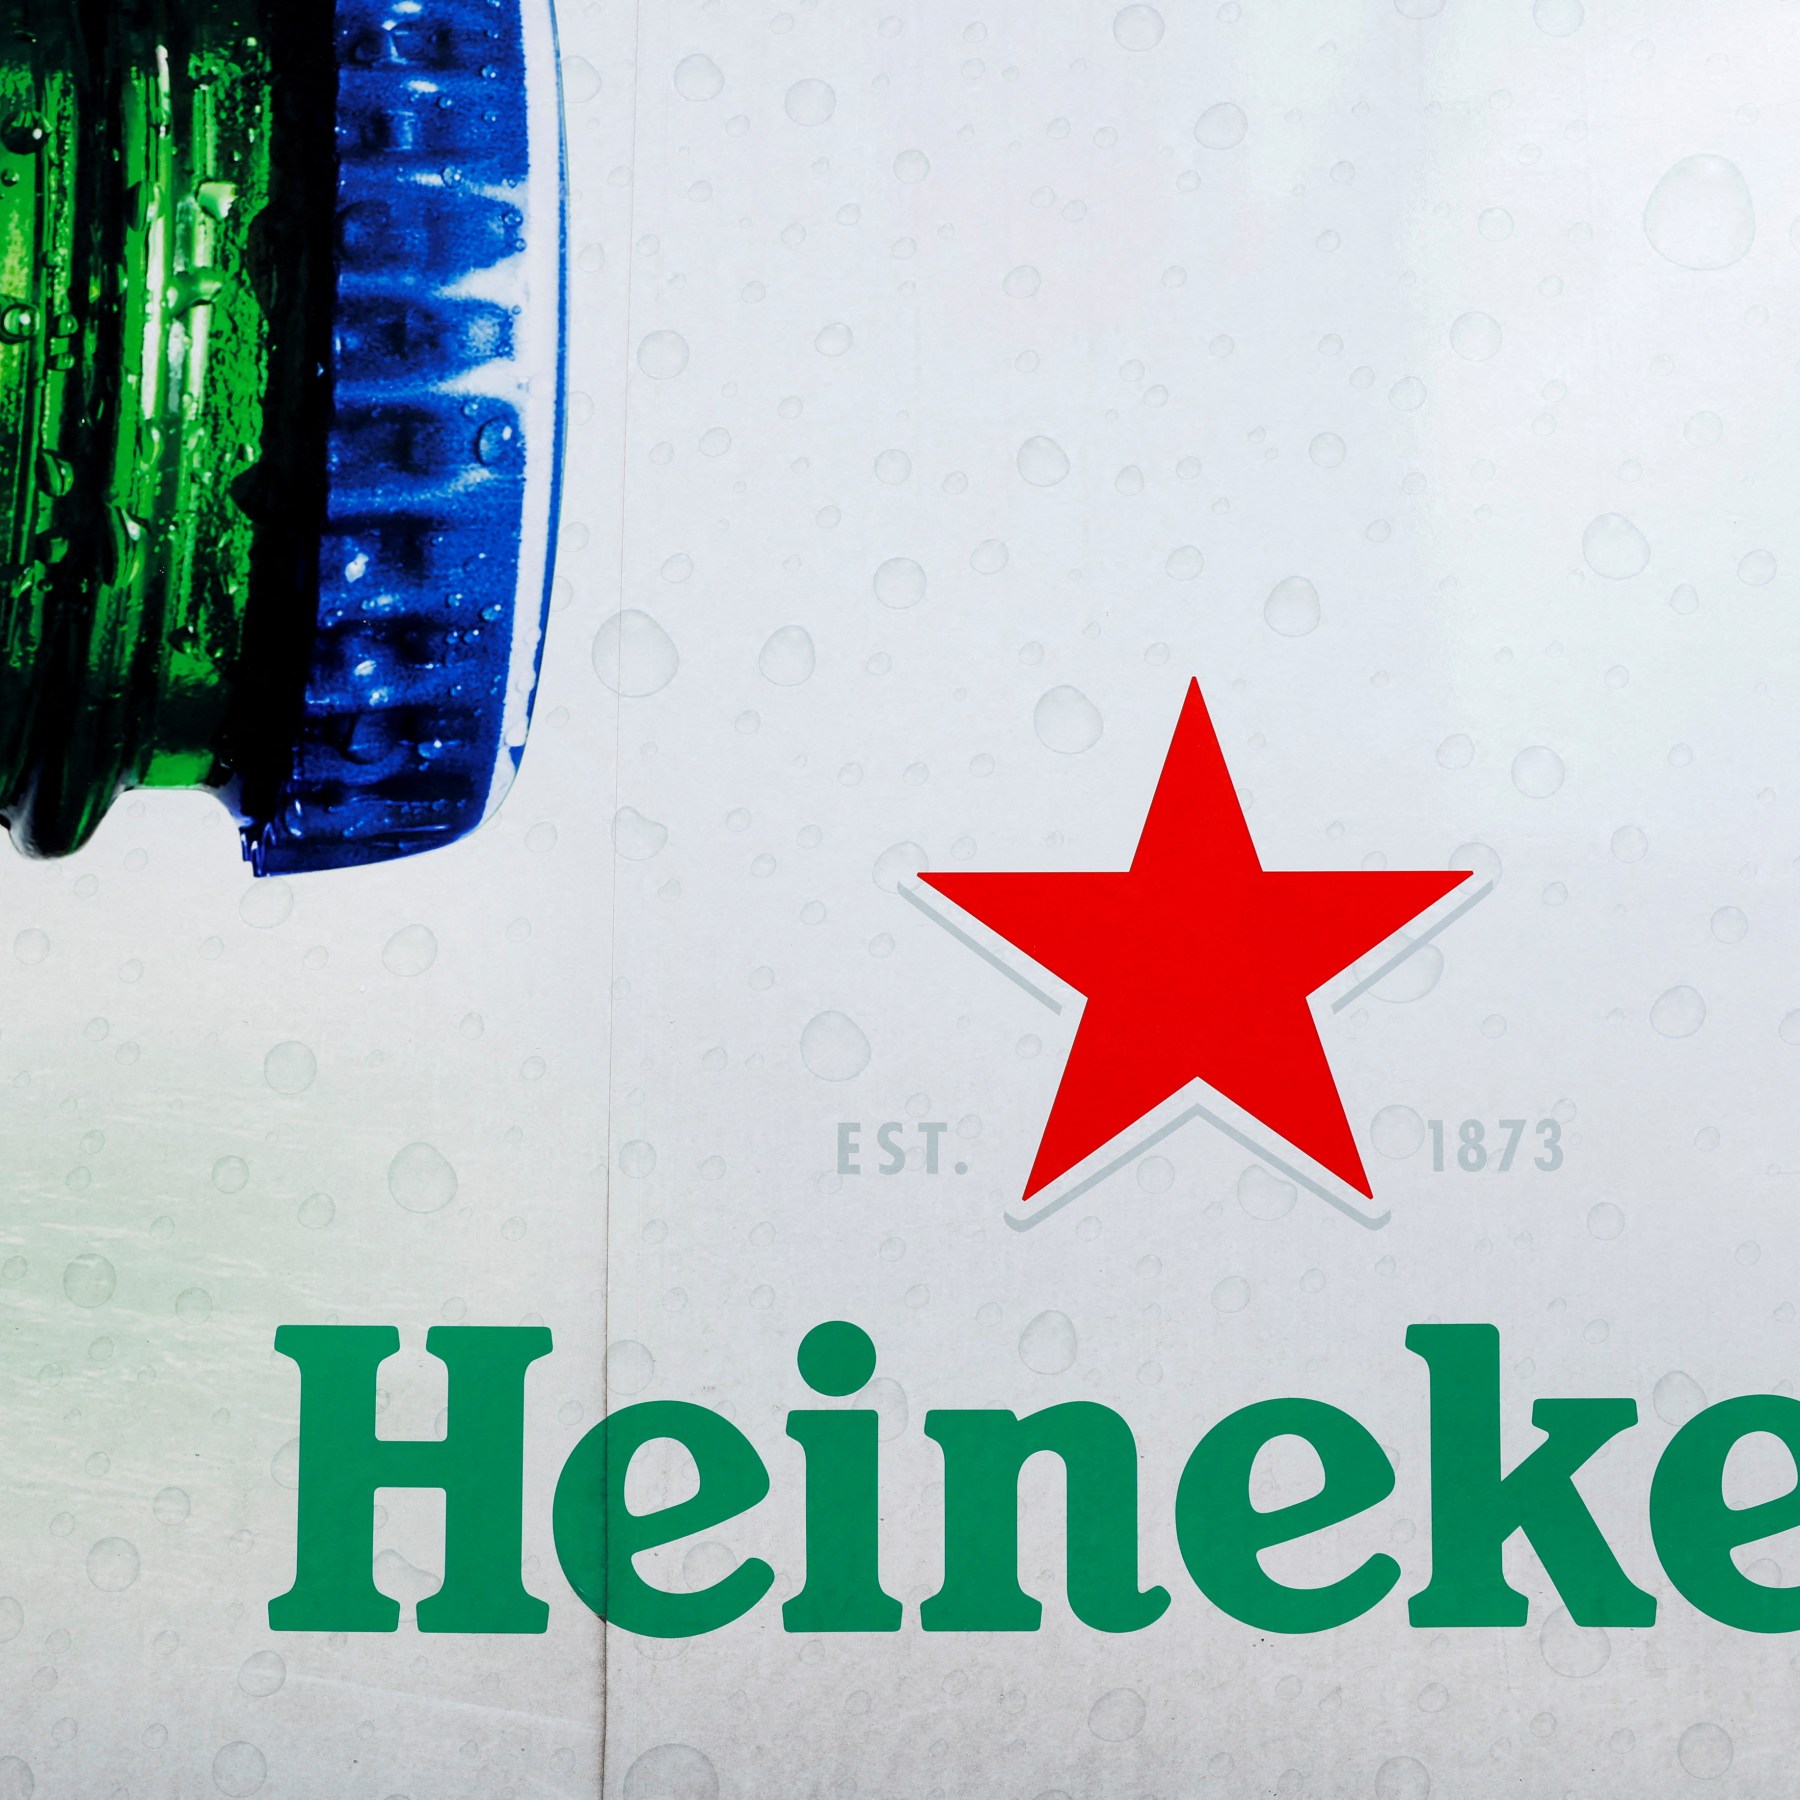 Dutch brewer Heineken completes its withdrawal from Russia, takes $325m hit, Russia-Ukraine war News